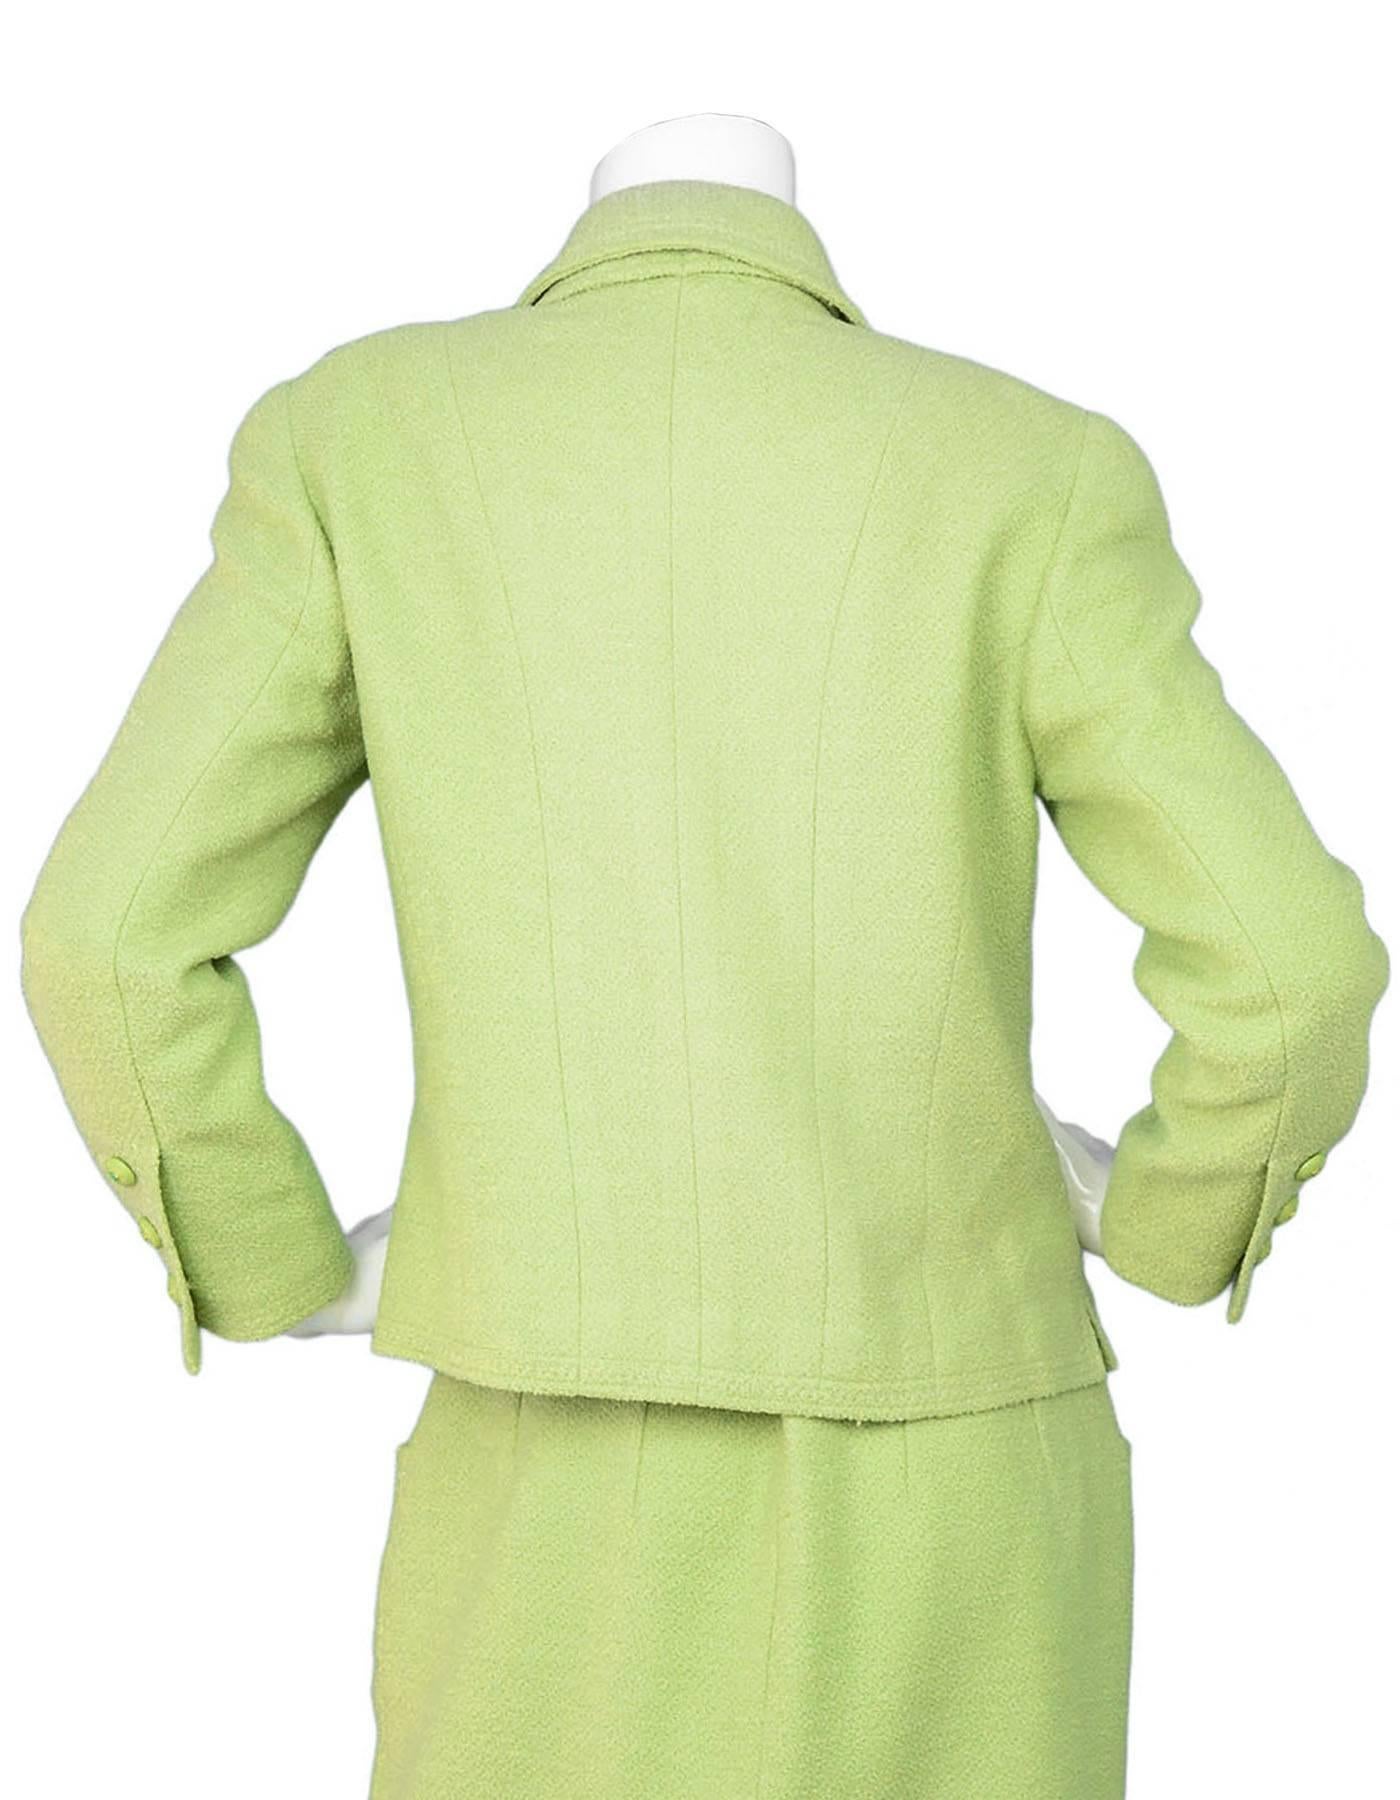 Chanel Chartreuse Boucle Button-Up Jacket w/ Neck Tie 1